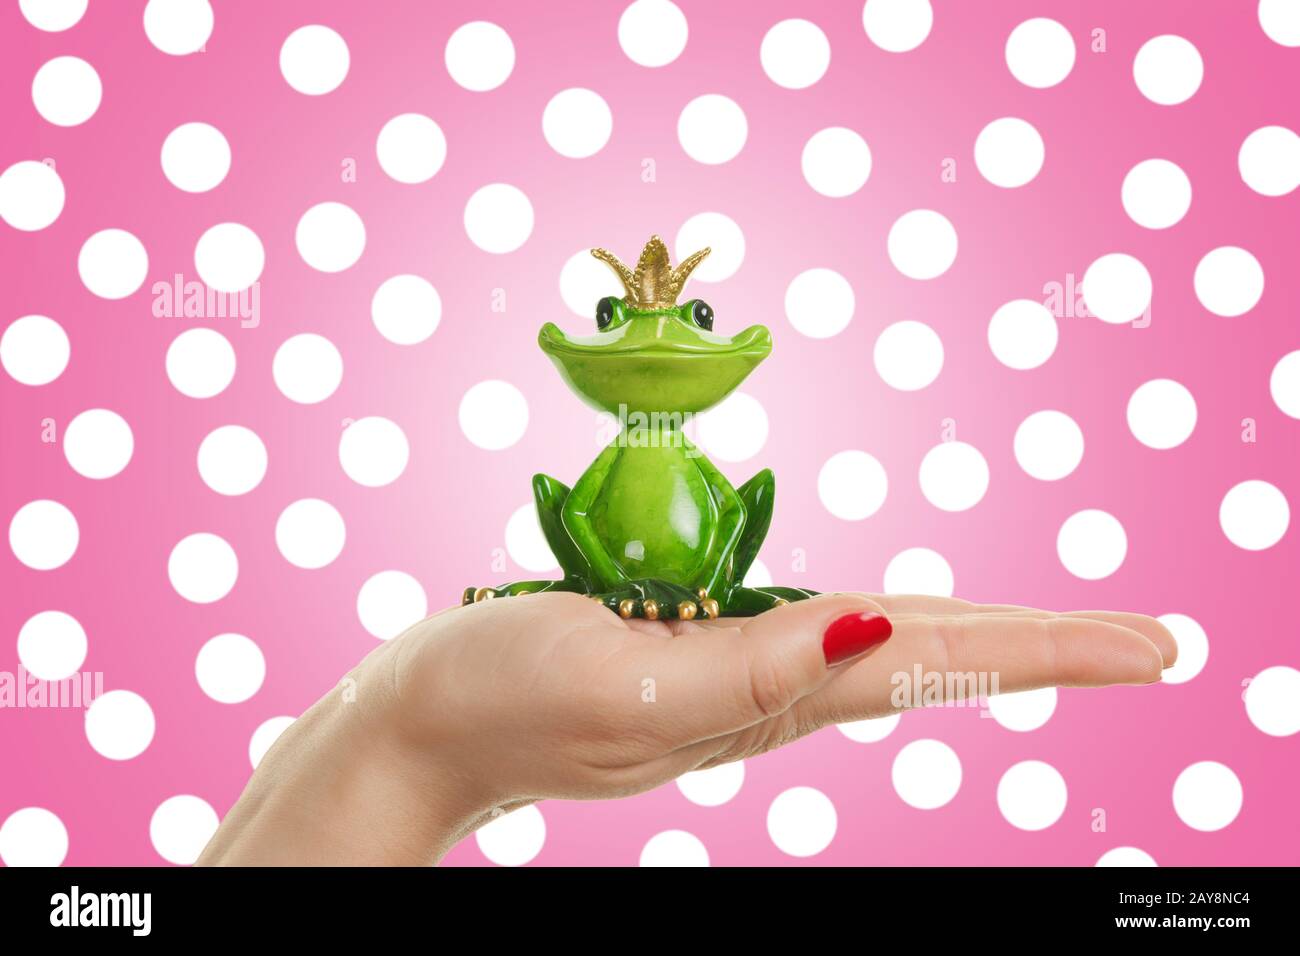 Female hand is holding frog prince, concept for dating, love and valentines day Stock Photo